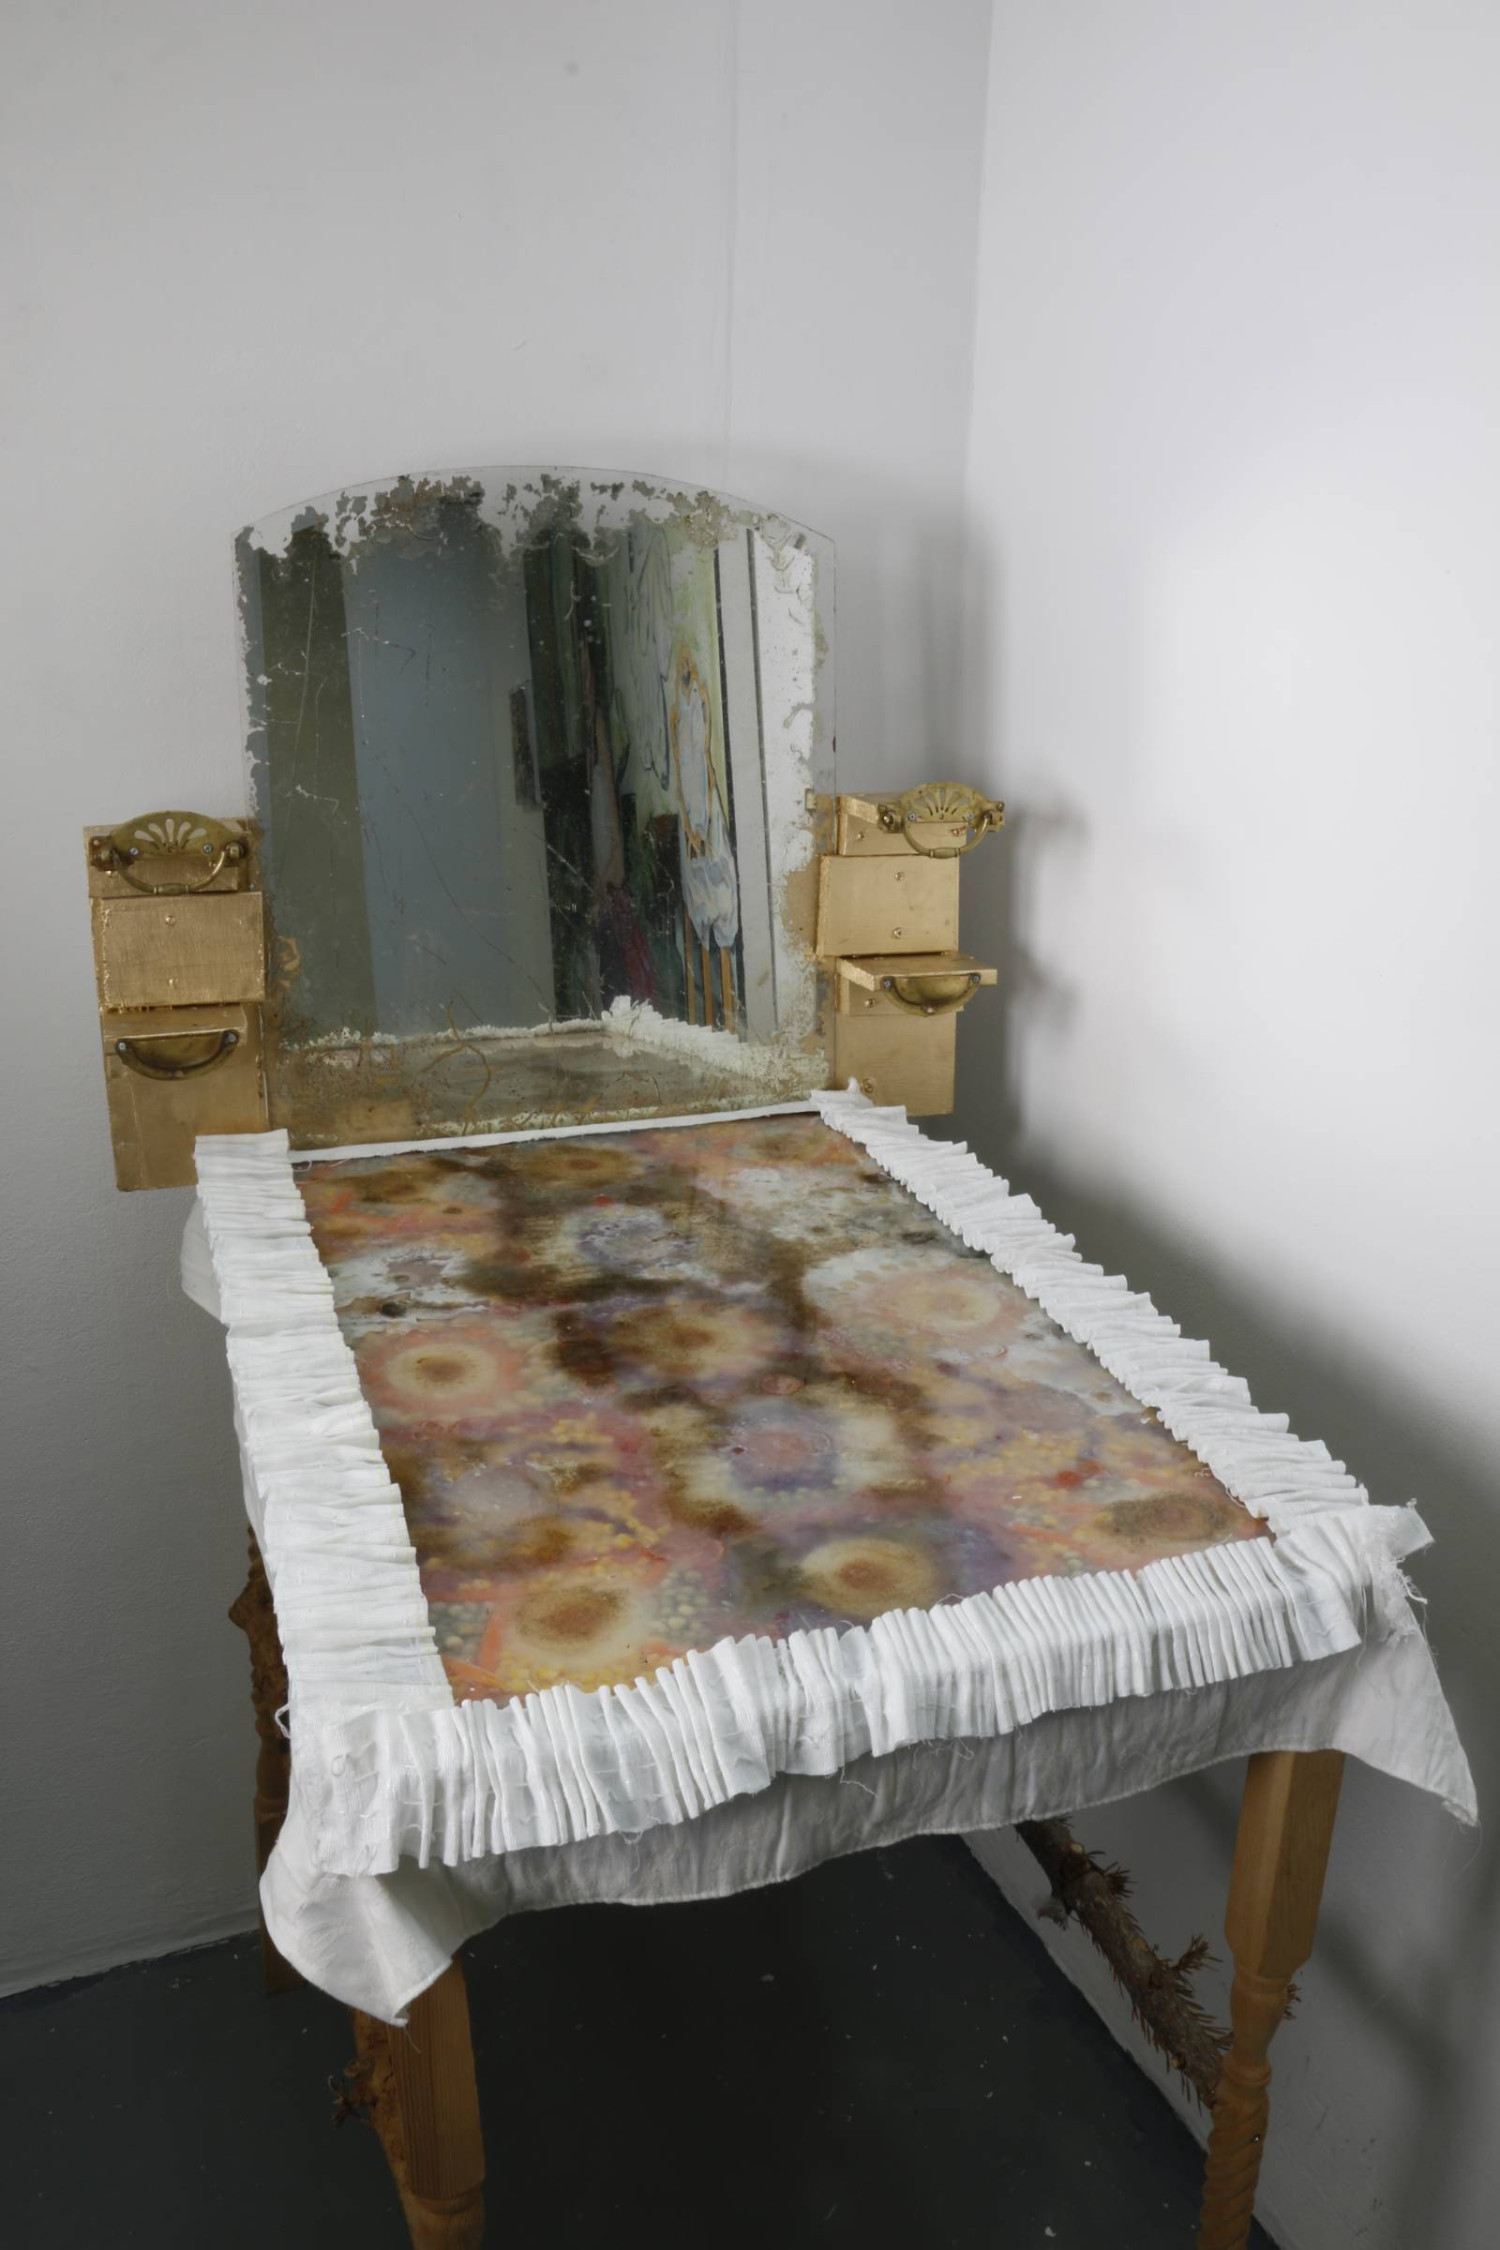 *Something hates unevenness*, Wood, tinned fruit and vegetables, glass, agar agar and found fabric, 70 x  50 x 65cm